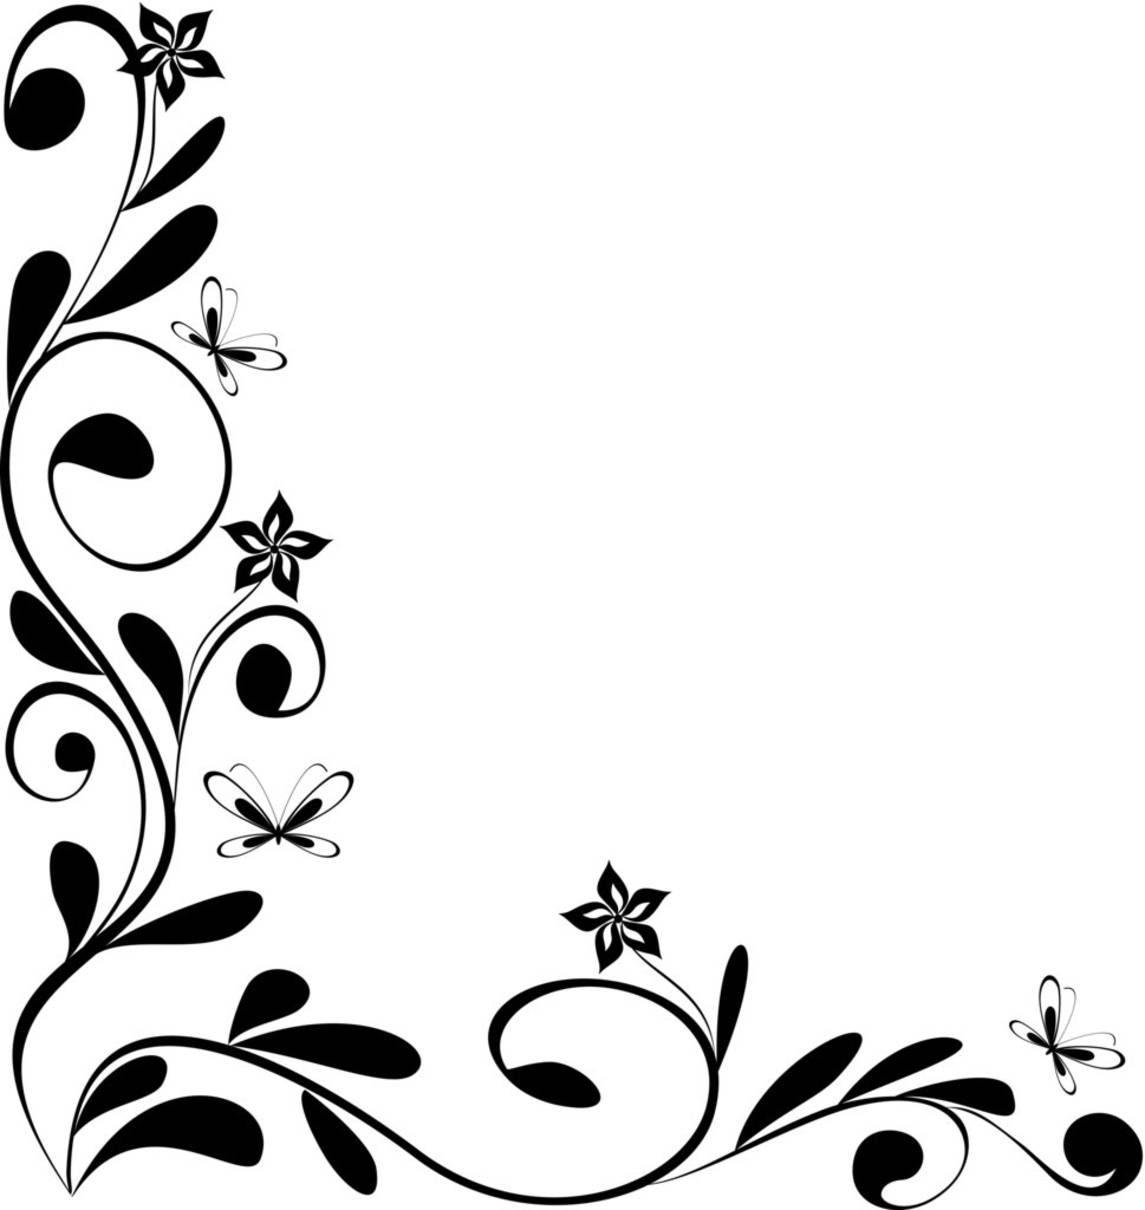 Best And Beautiful Black And White Floral Corner Borders For Frames